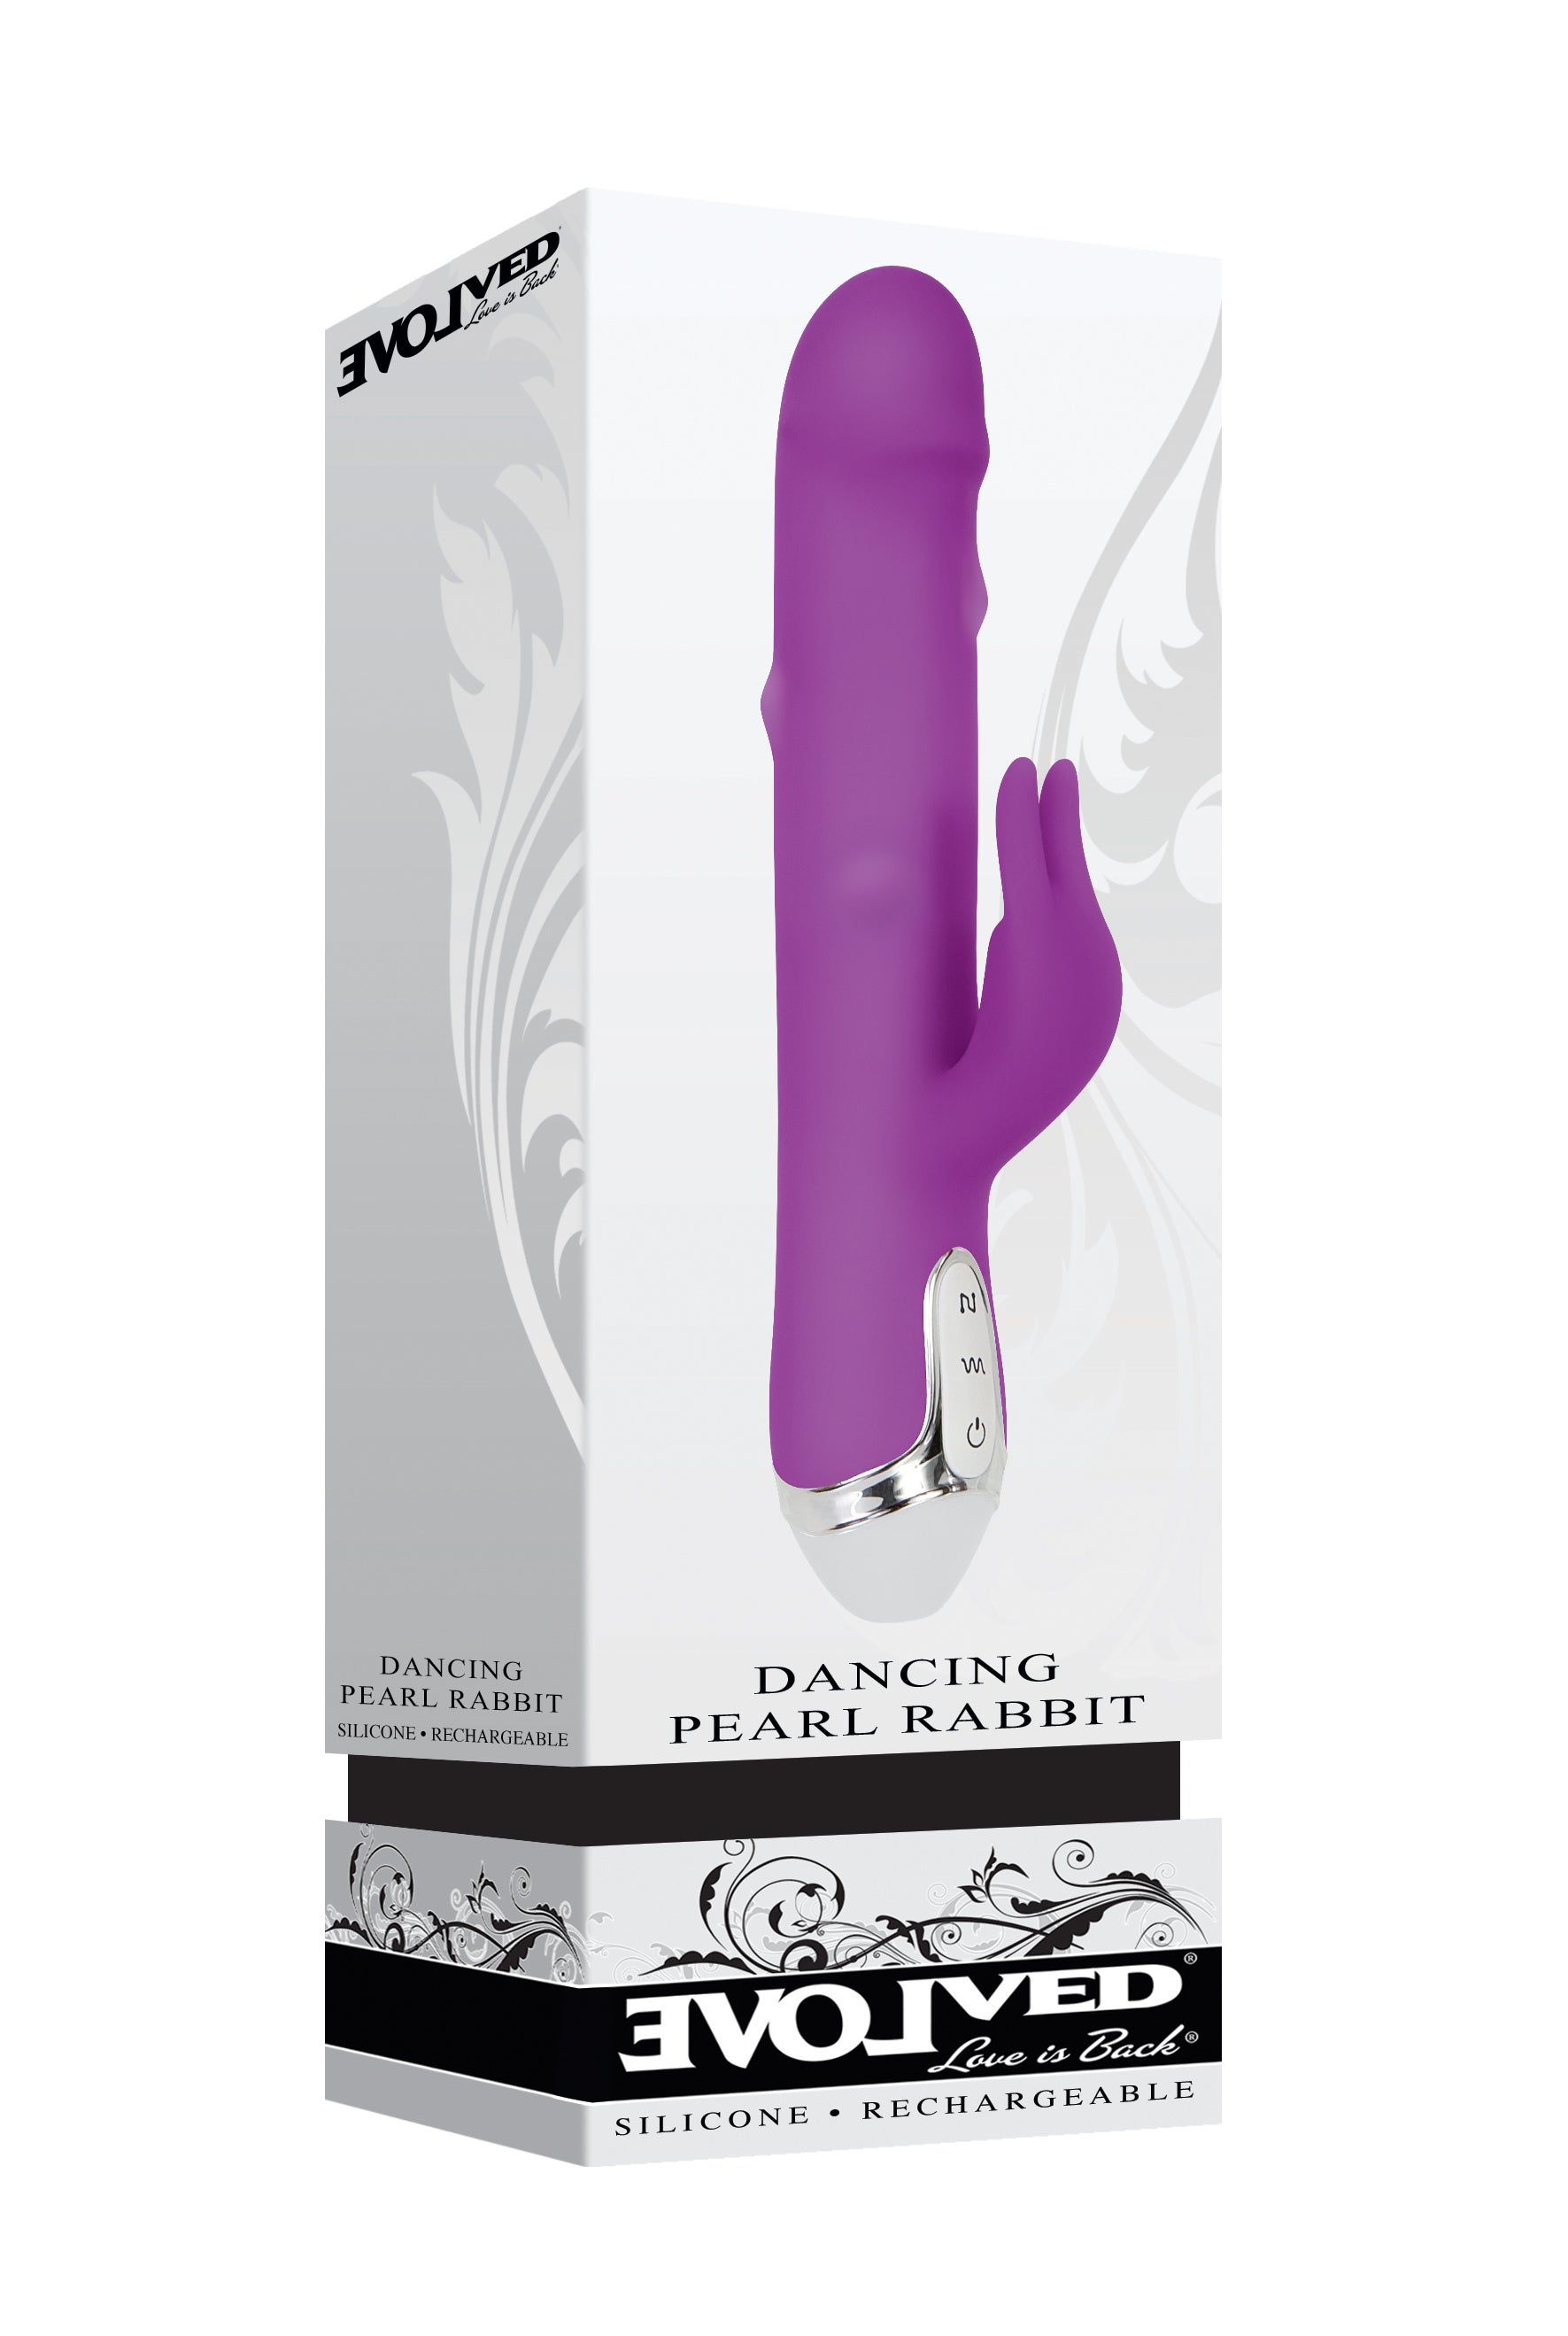 dancing pearl rabbit vibrator by evolved in box 